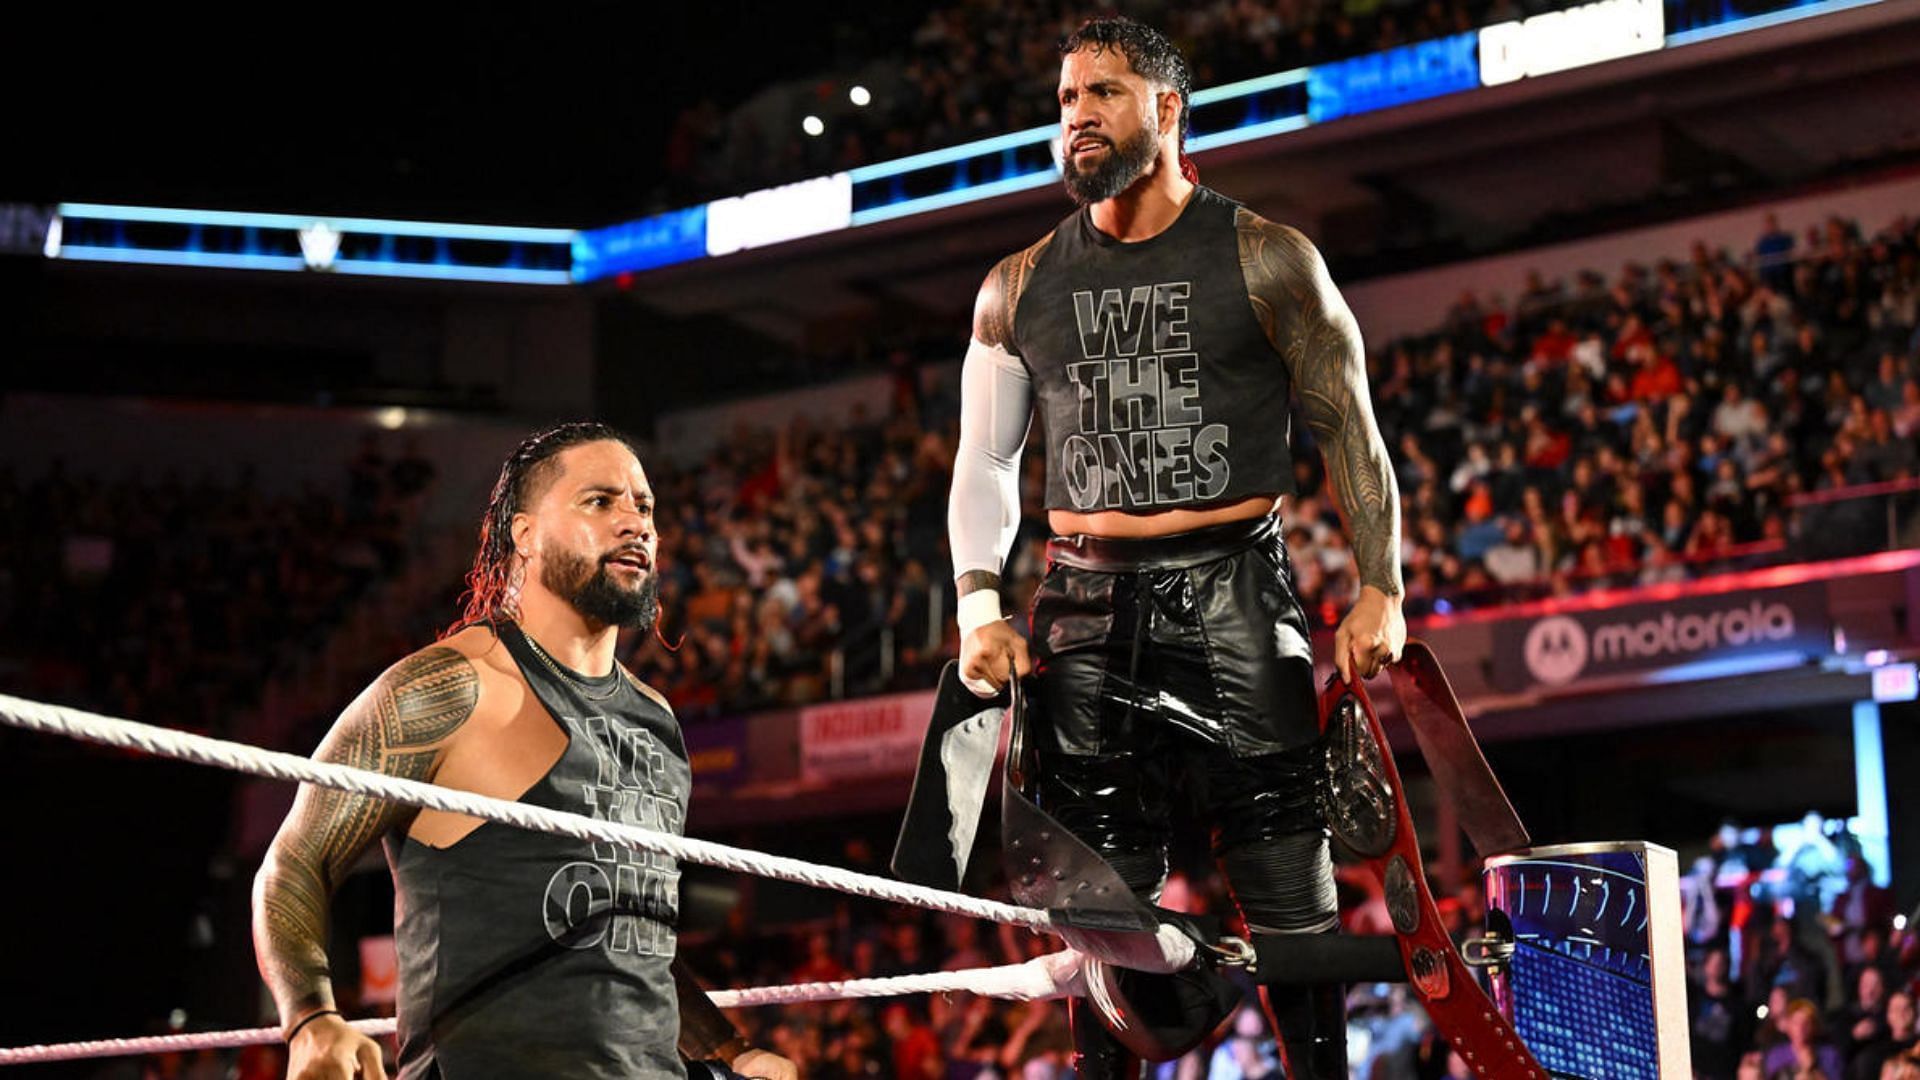 The Usos are the longest reigning WWE Tag Team Champions!